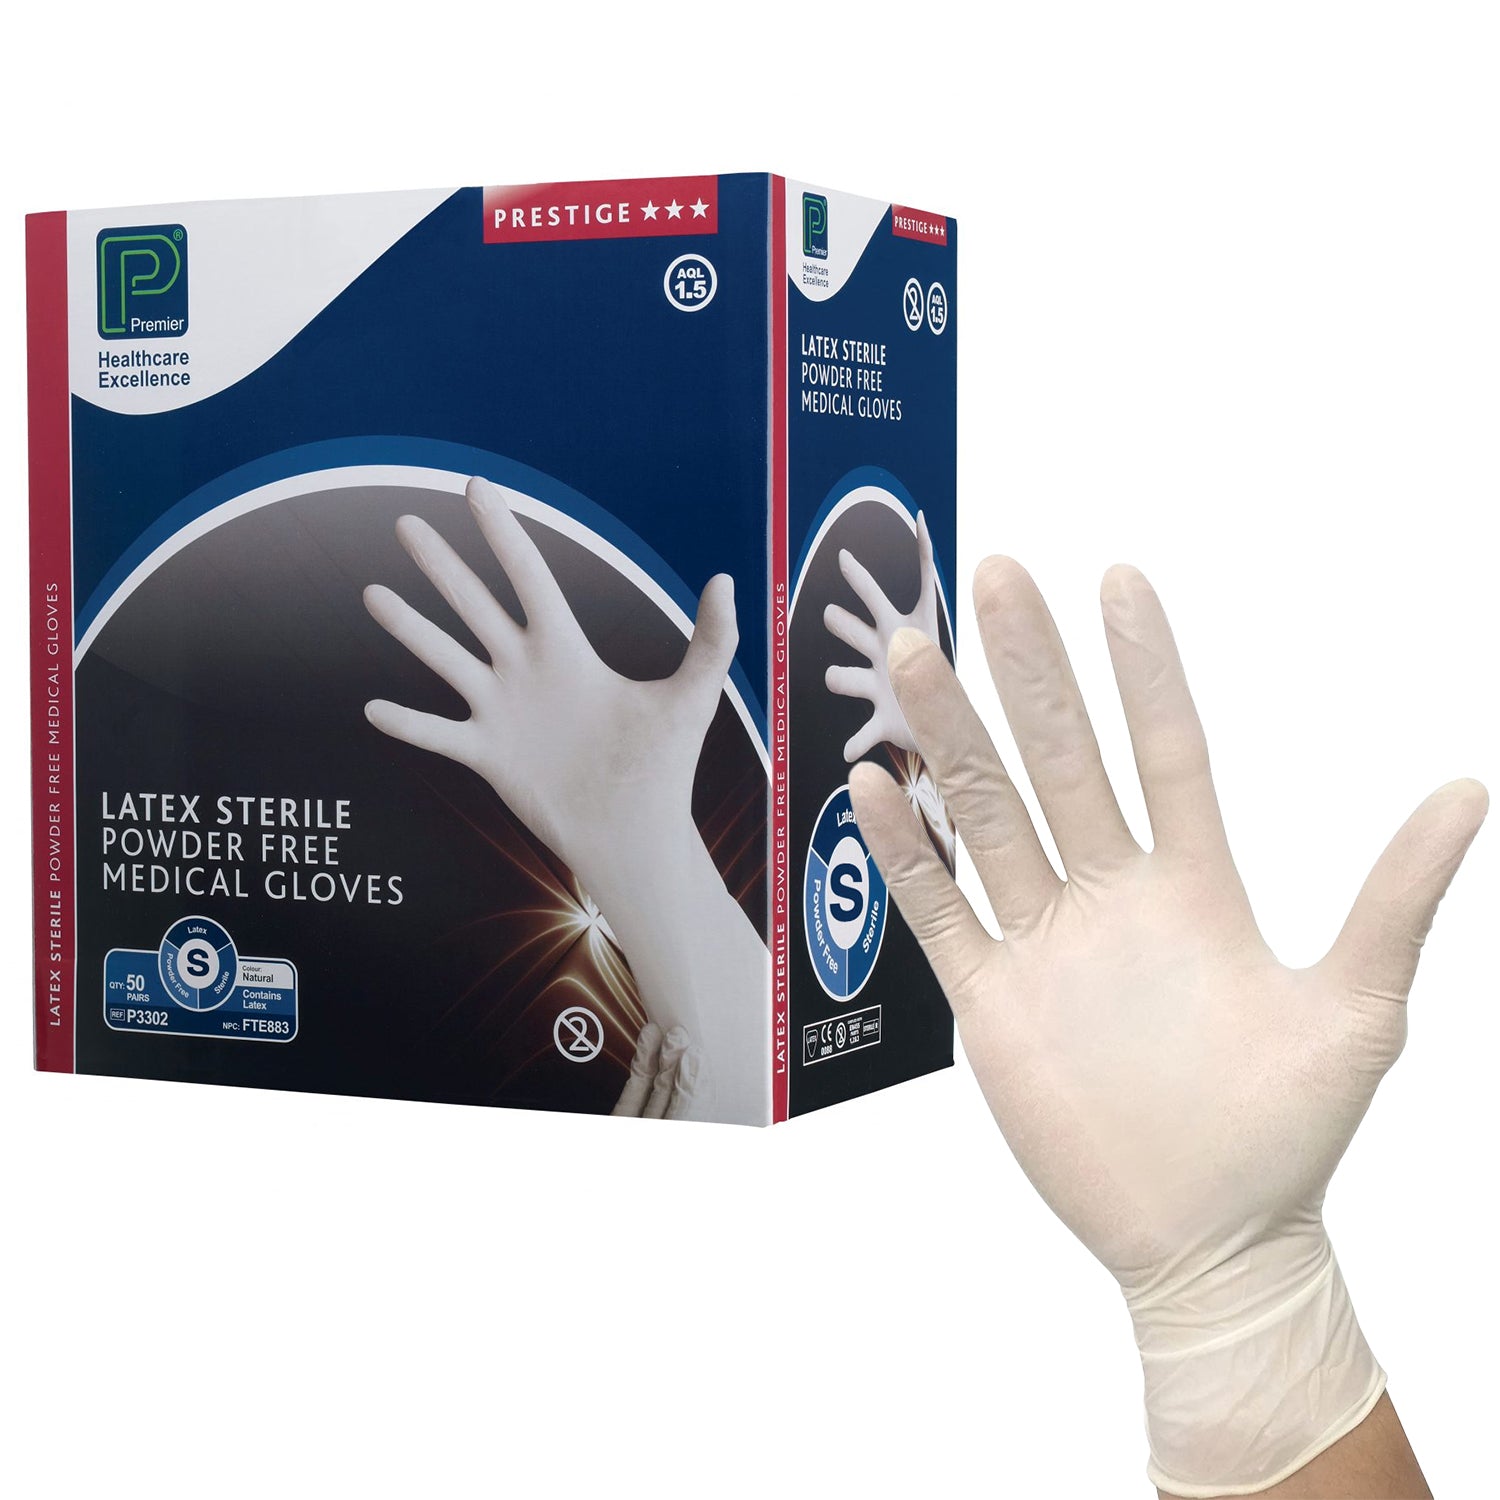 Premier Latex Sterile Powder Free Gloves | Small | Pack of 50 pairs (5)